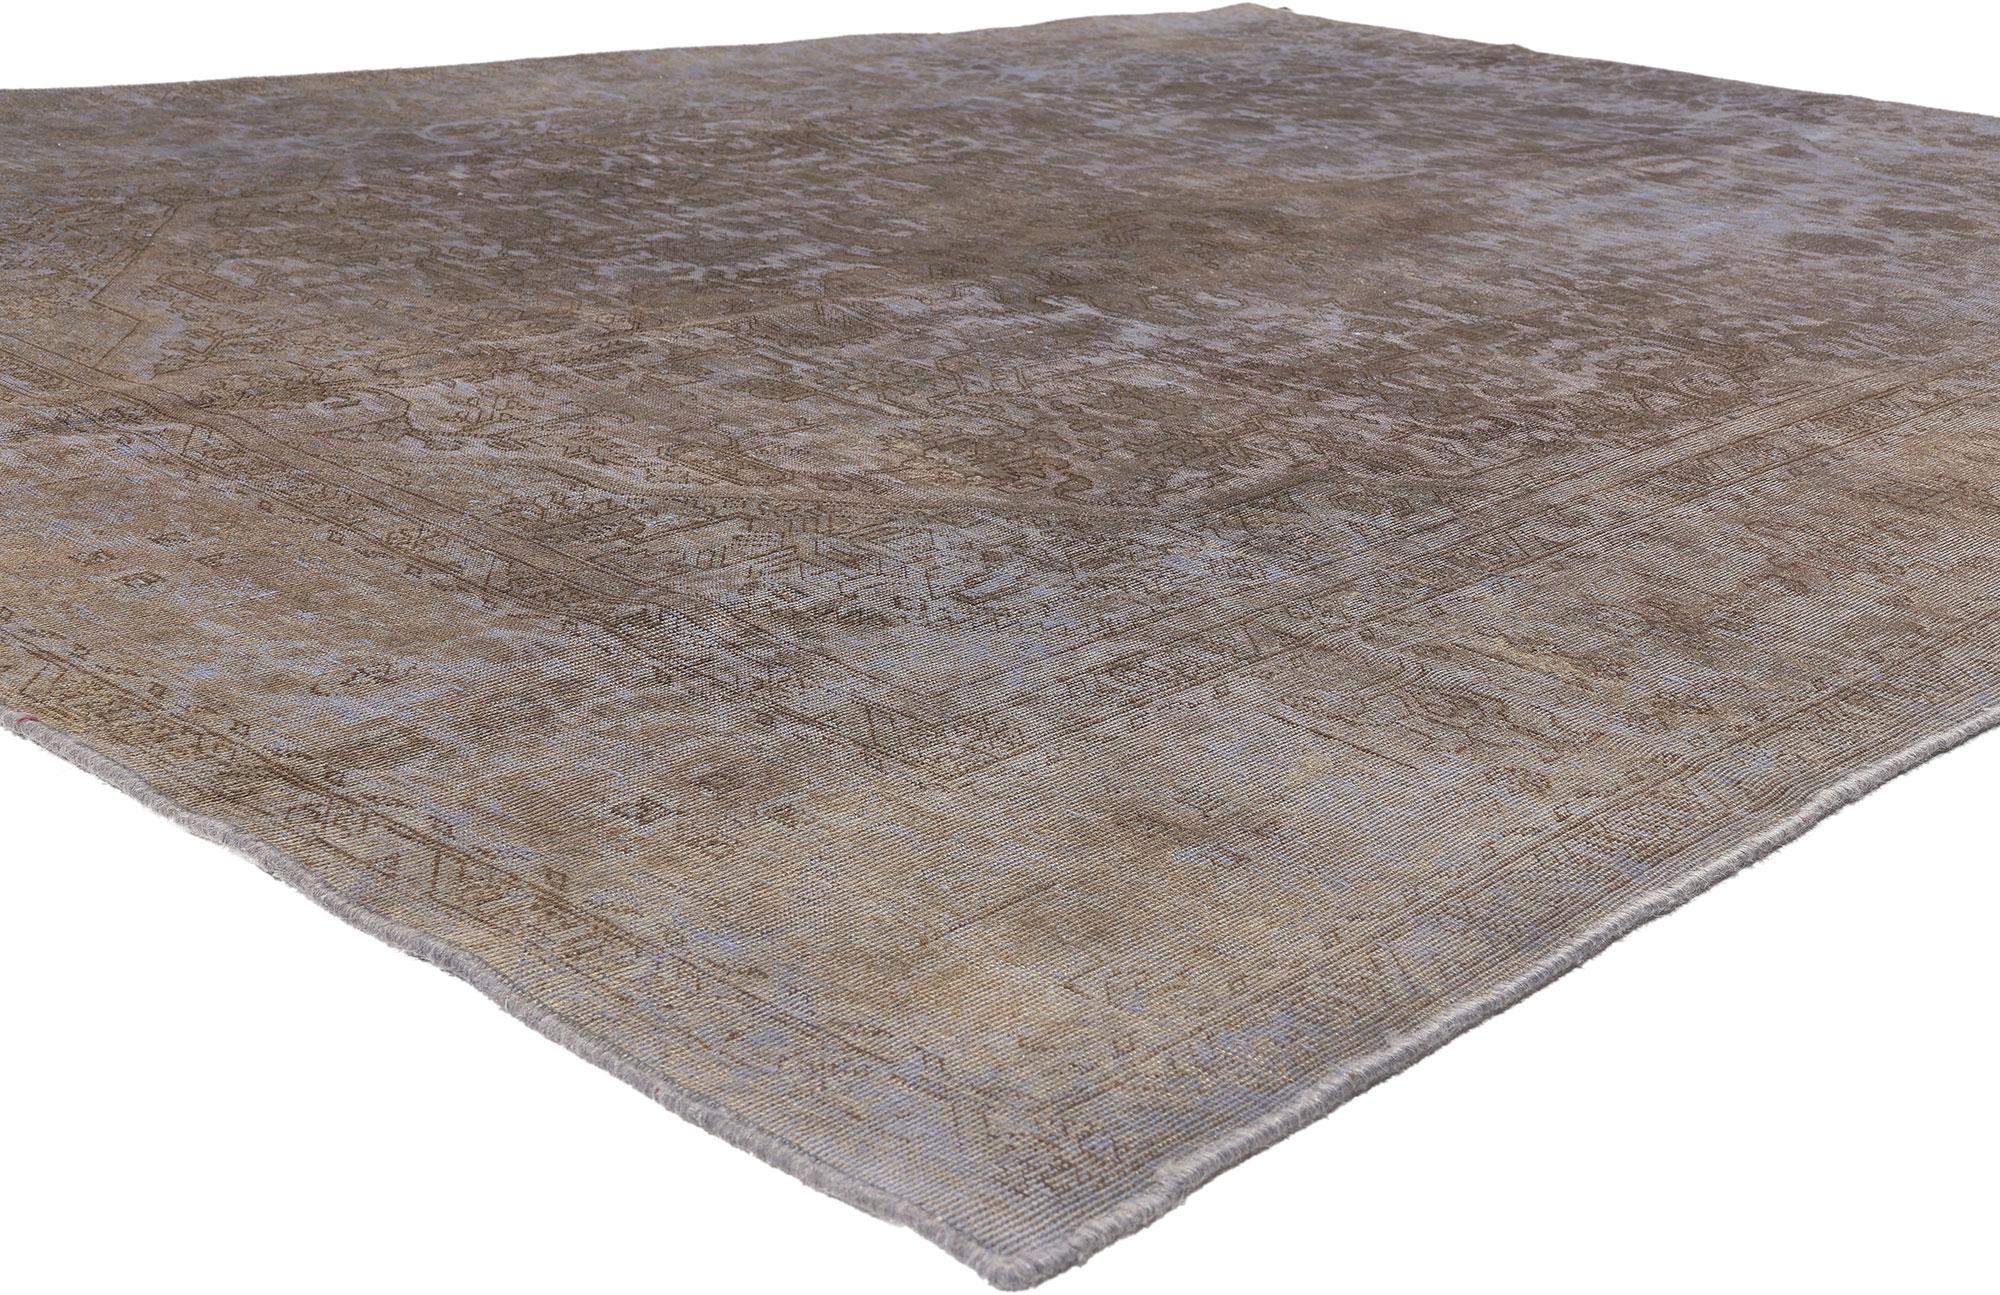 60614 Vintage Turkish Overdyed Rug, 07'10 x 10'11. 
Industrial chic meets modern elegance in this vintage Turkish overdyed rug. The erased botanical design and analogous color scheme in this piece strike the right balance of edgy and luxe